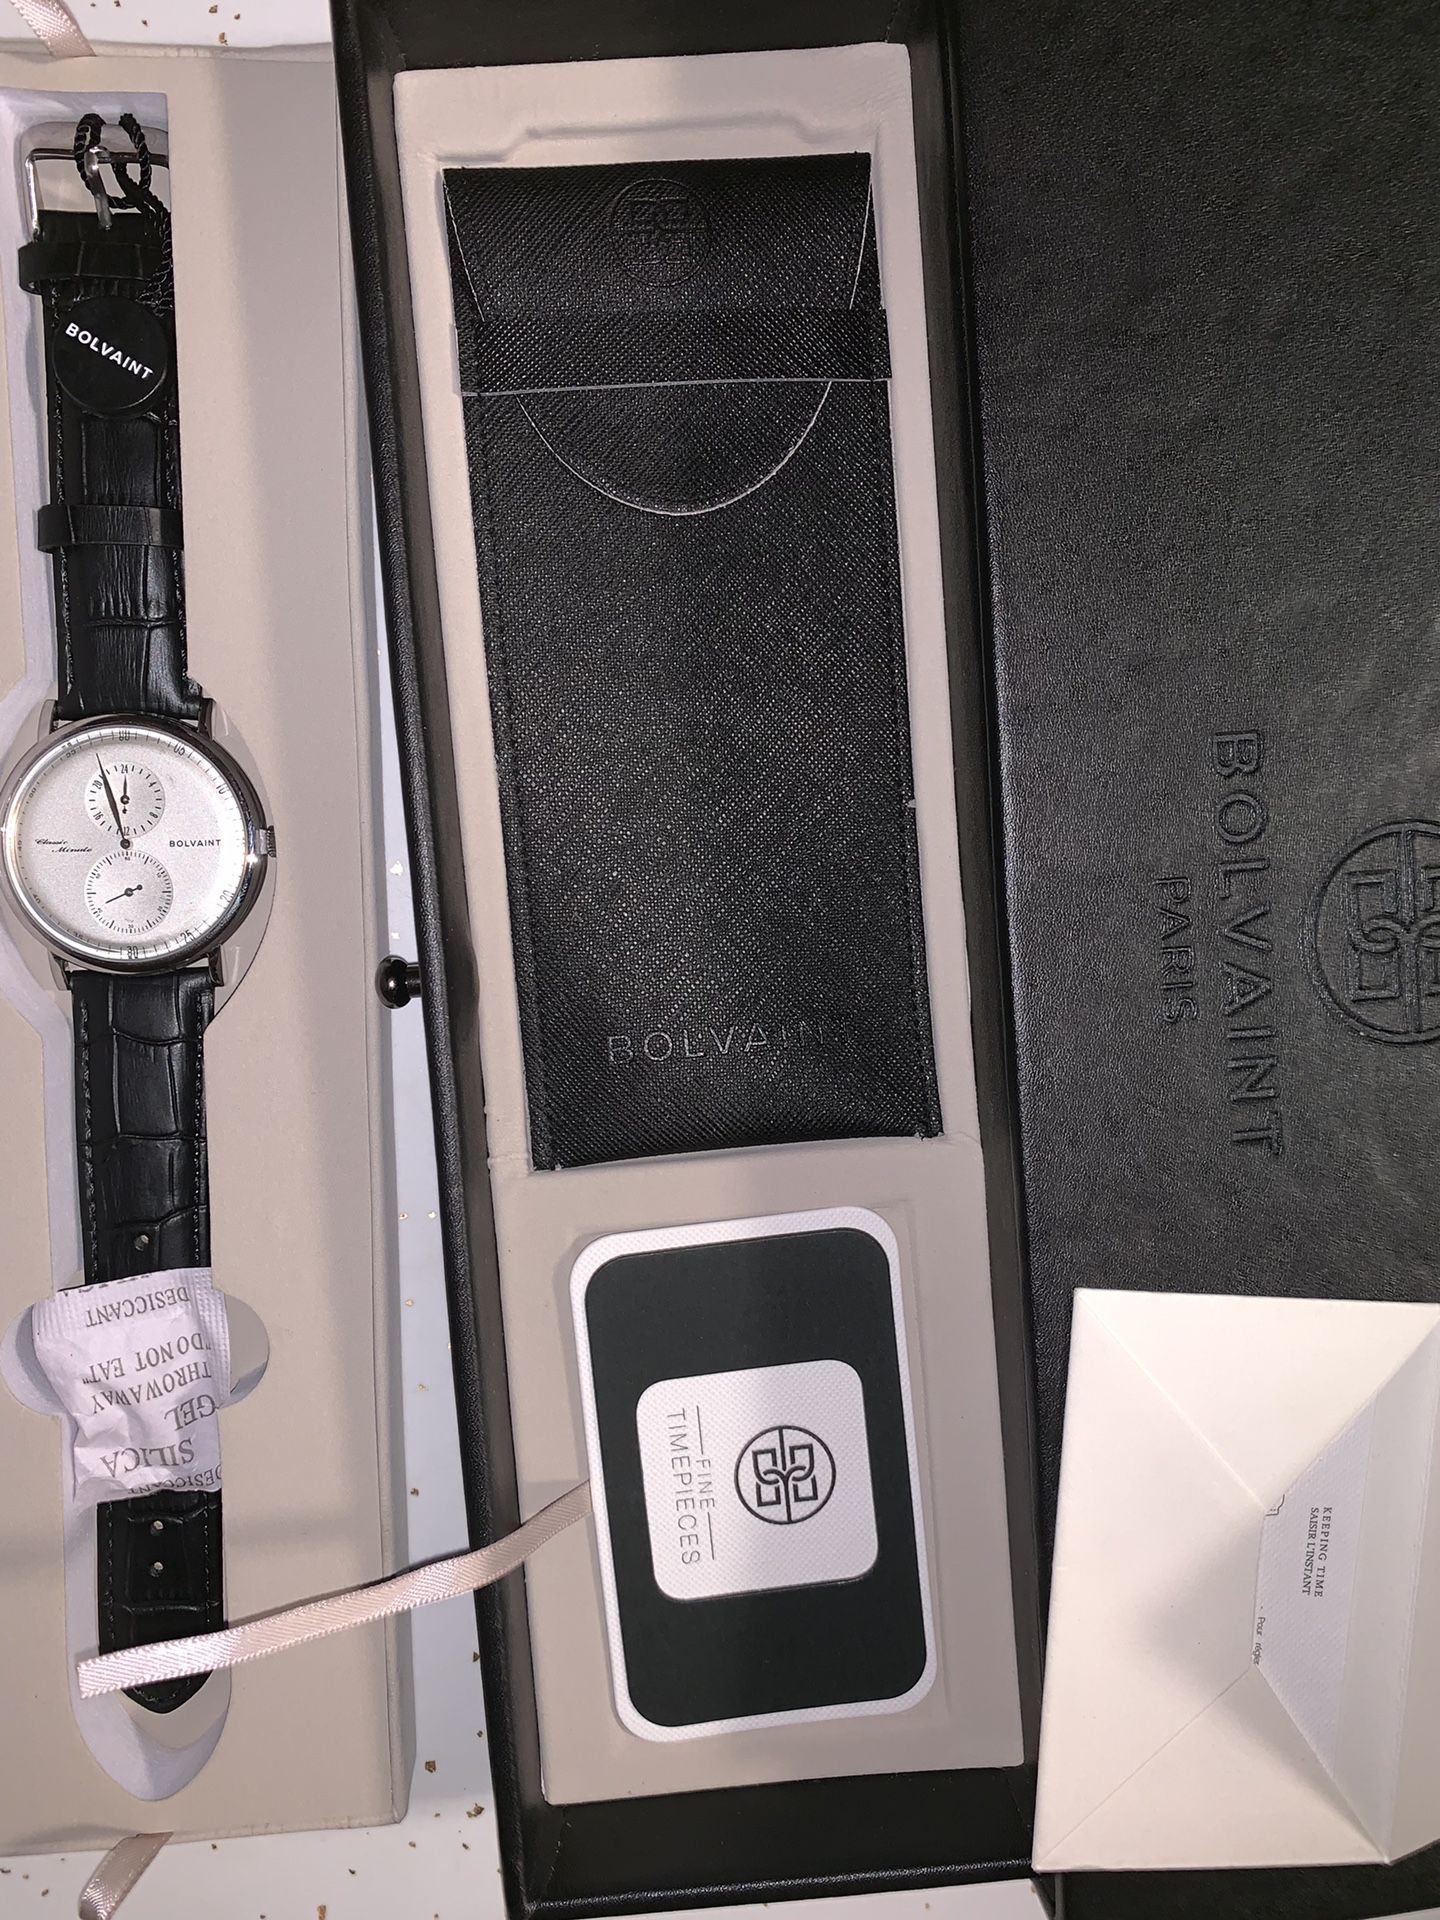 Bolvaint paris men watch brand new never used. Make your offer